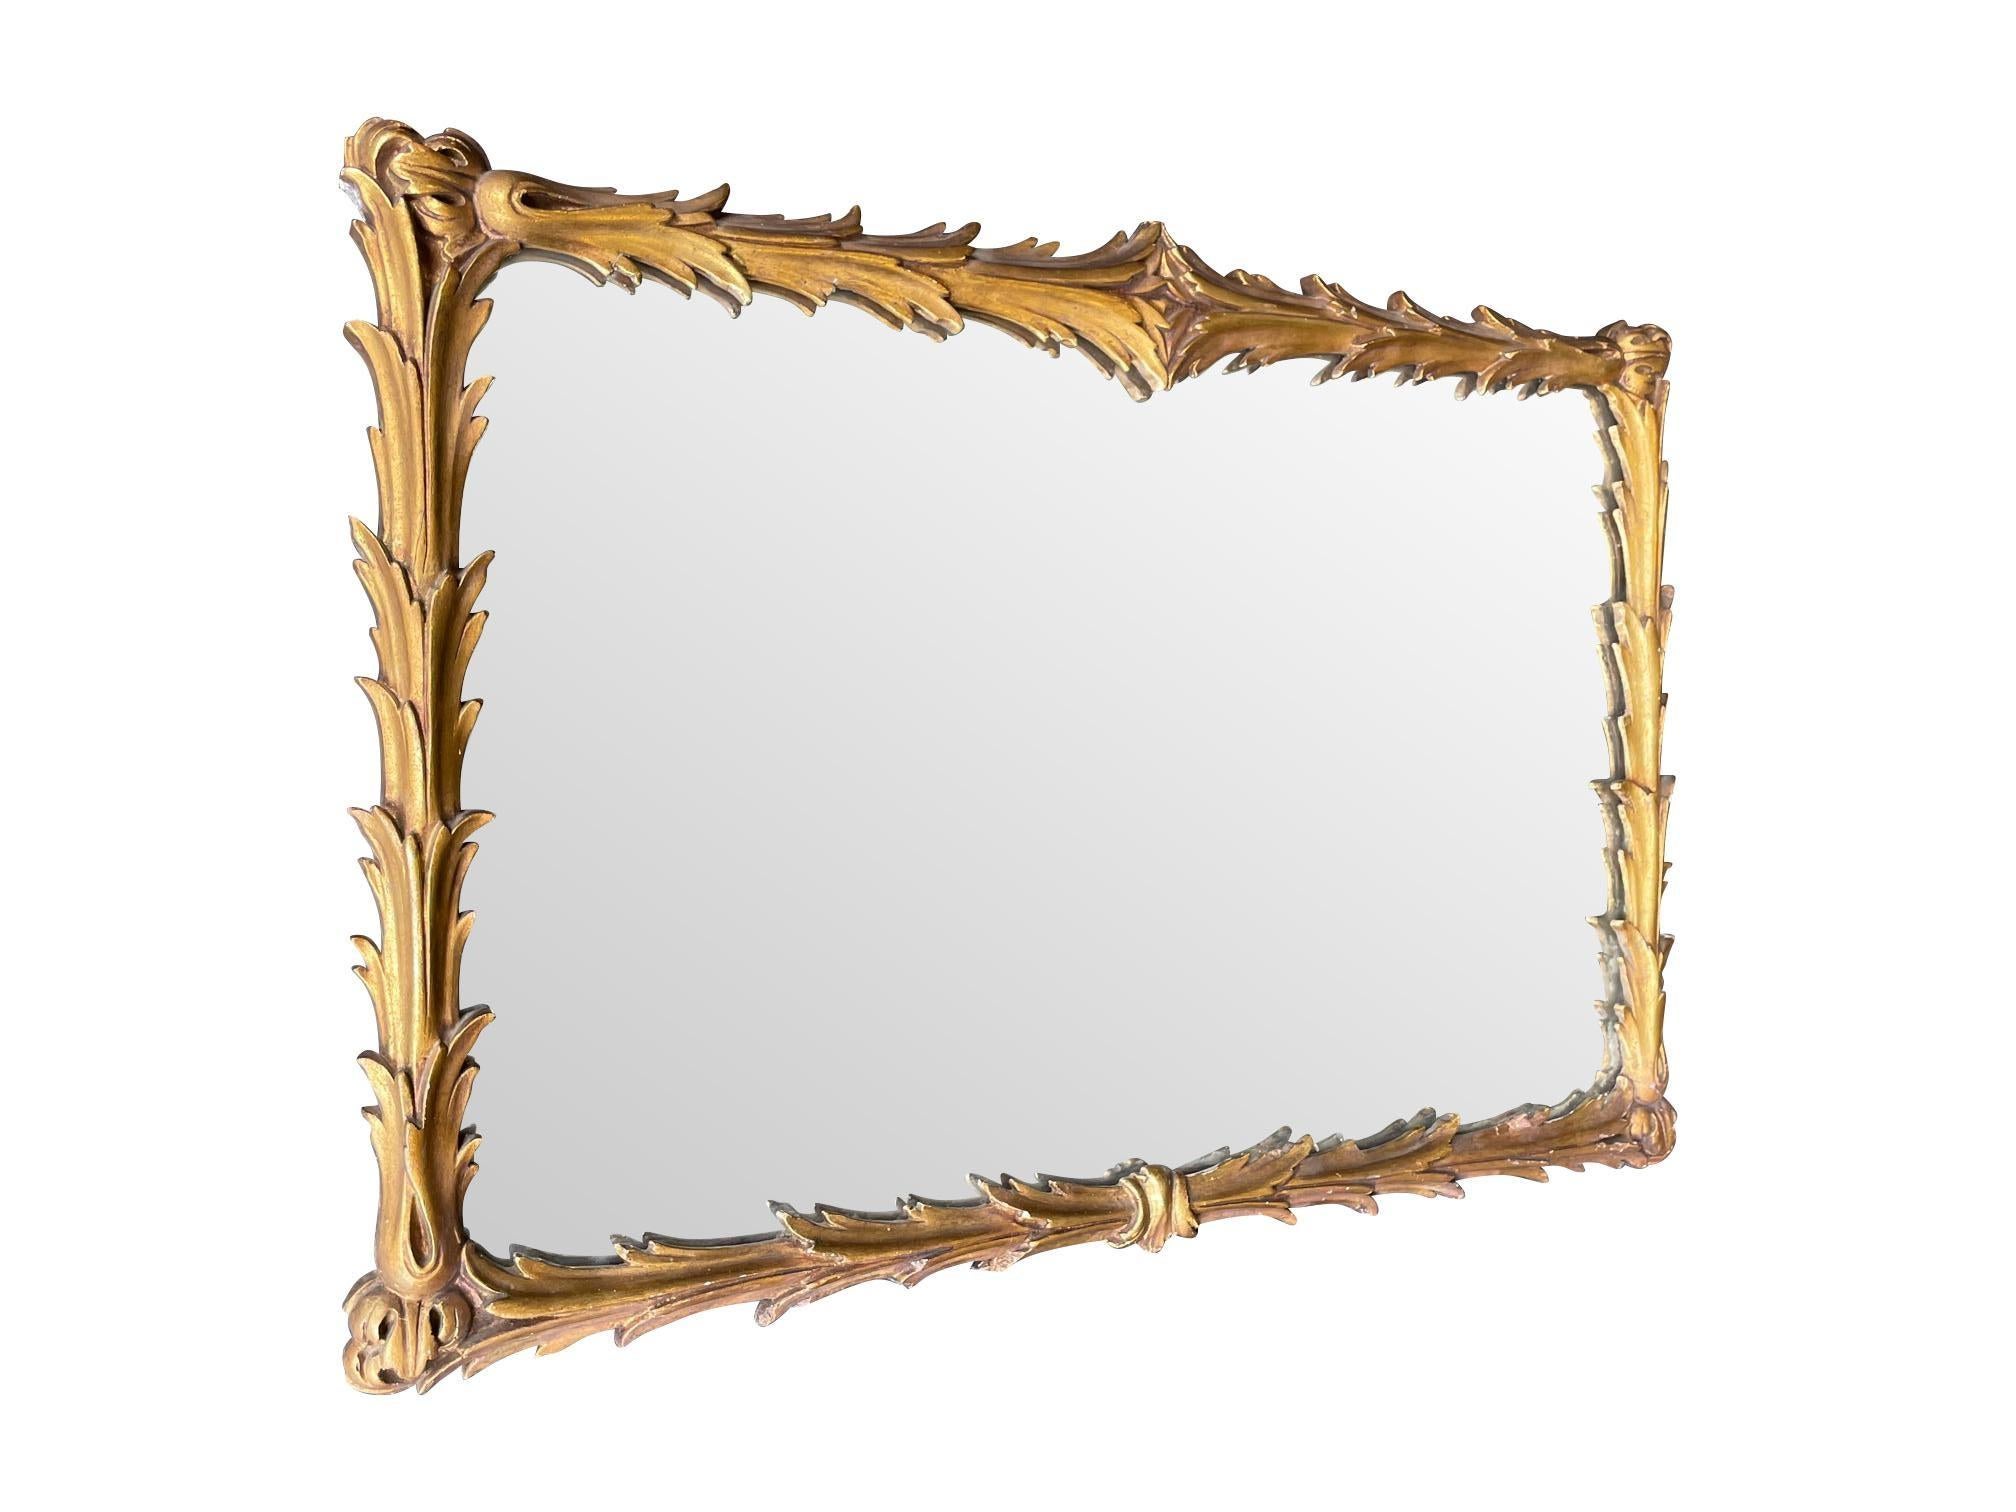 Lovely 1950s Italian Rectangular Rococo Style Gilt Gesso Acanthus Wall Mirror In Good Condition For Sale In London, GB